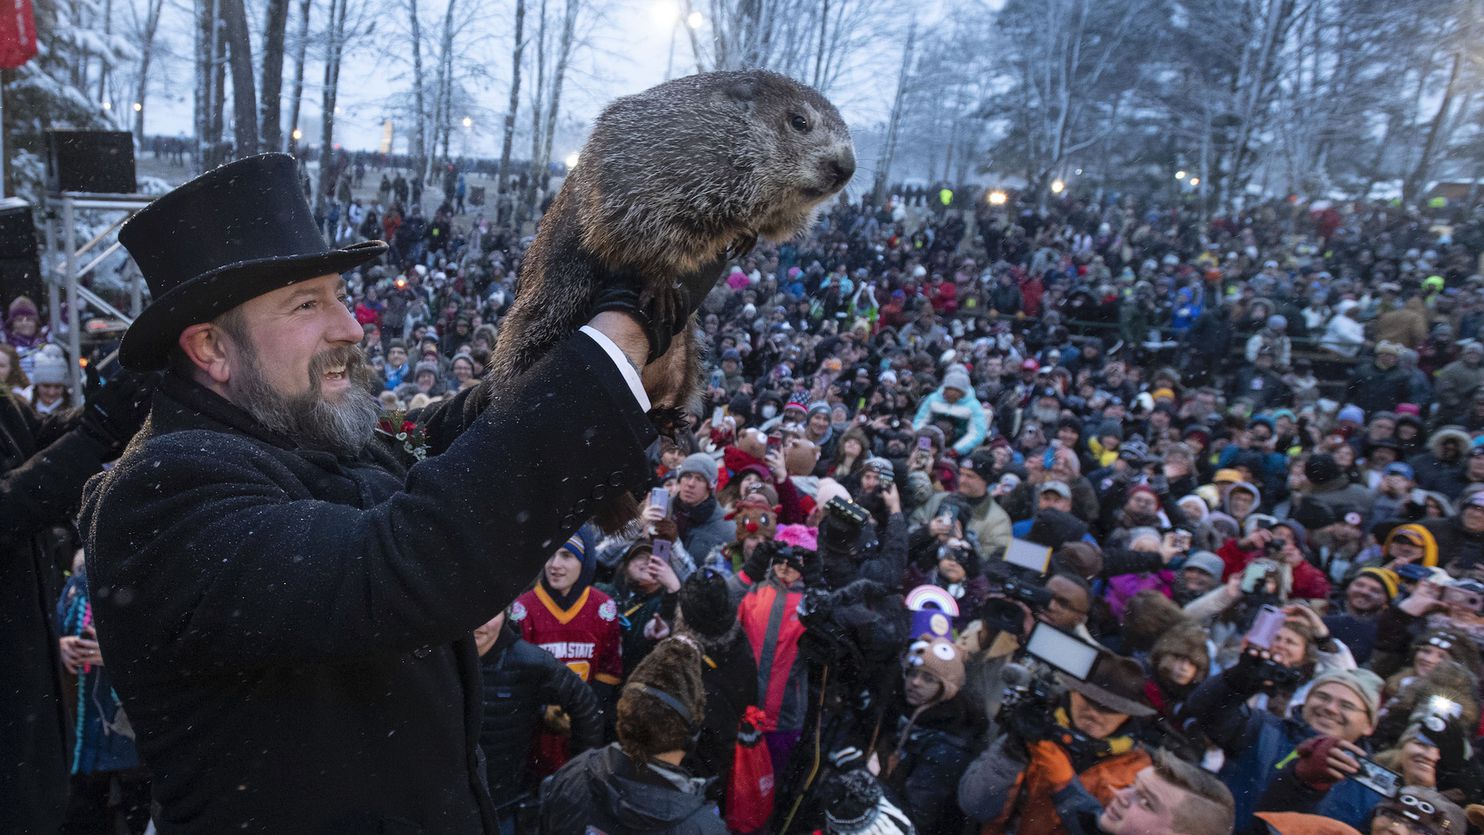 This Random Knowledge Quiz Is Easy If You’re Smart Groundhog day